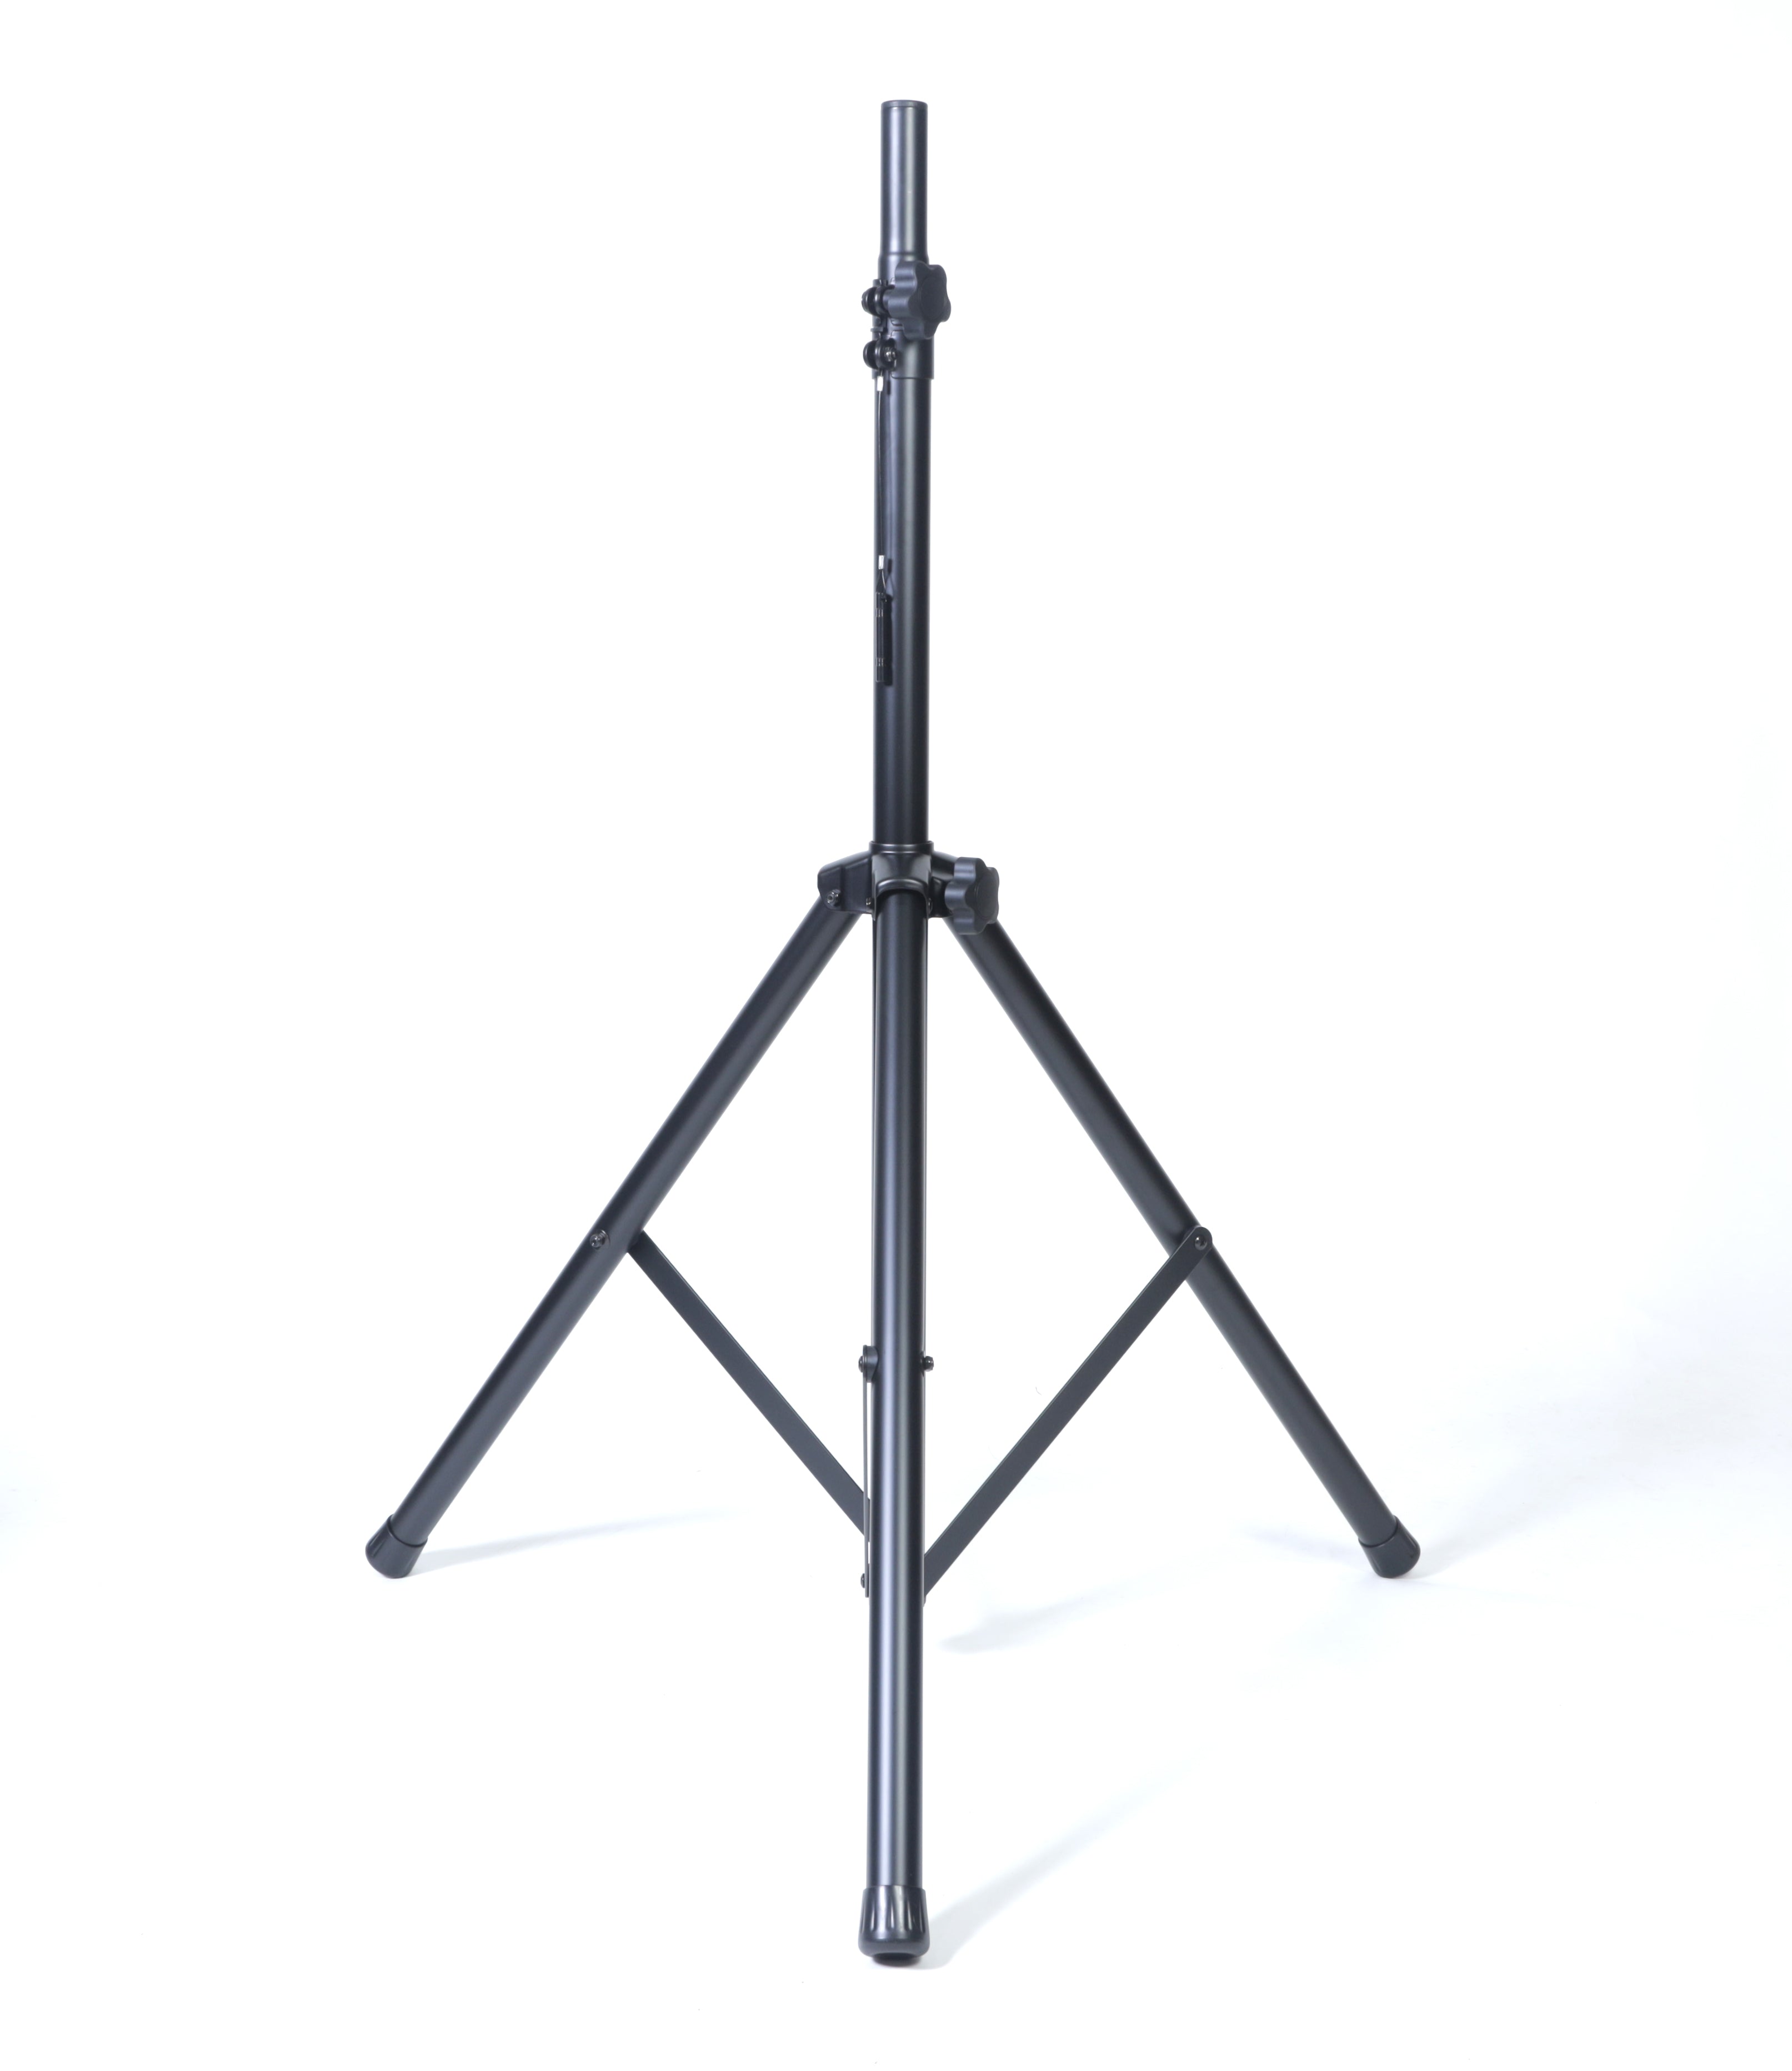 Universal Surround Sound Speaker Stands 6.65 ft • Height 46-80 in • Rated at 150 Pounds